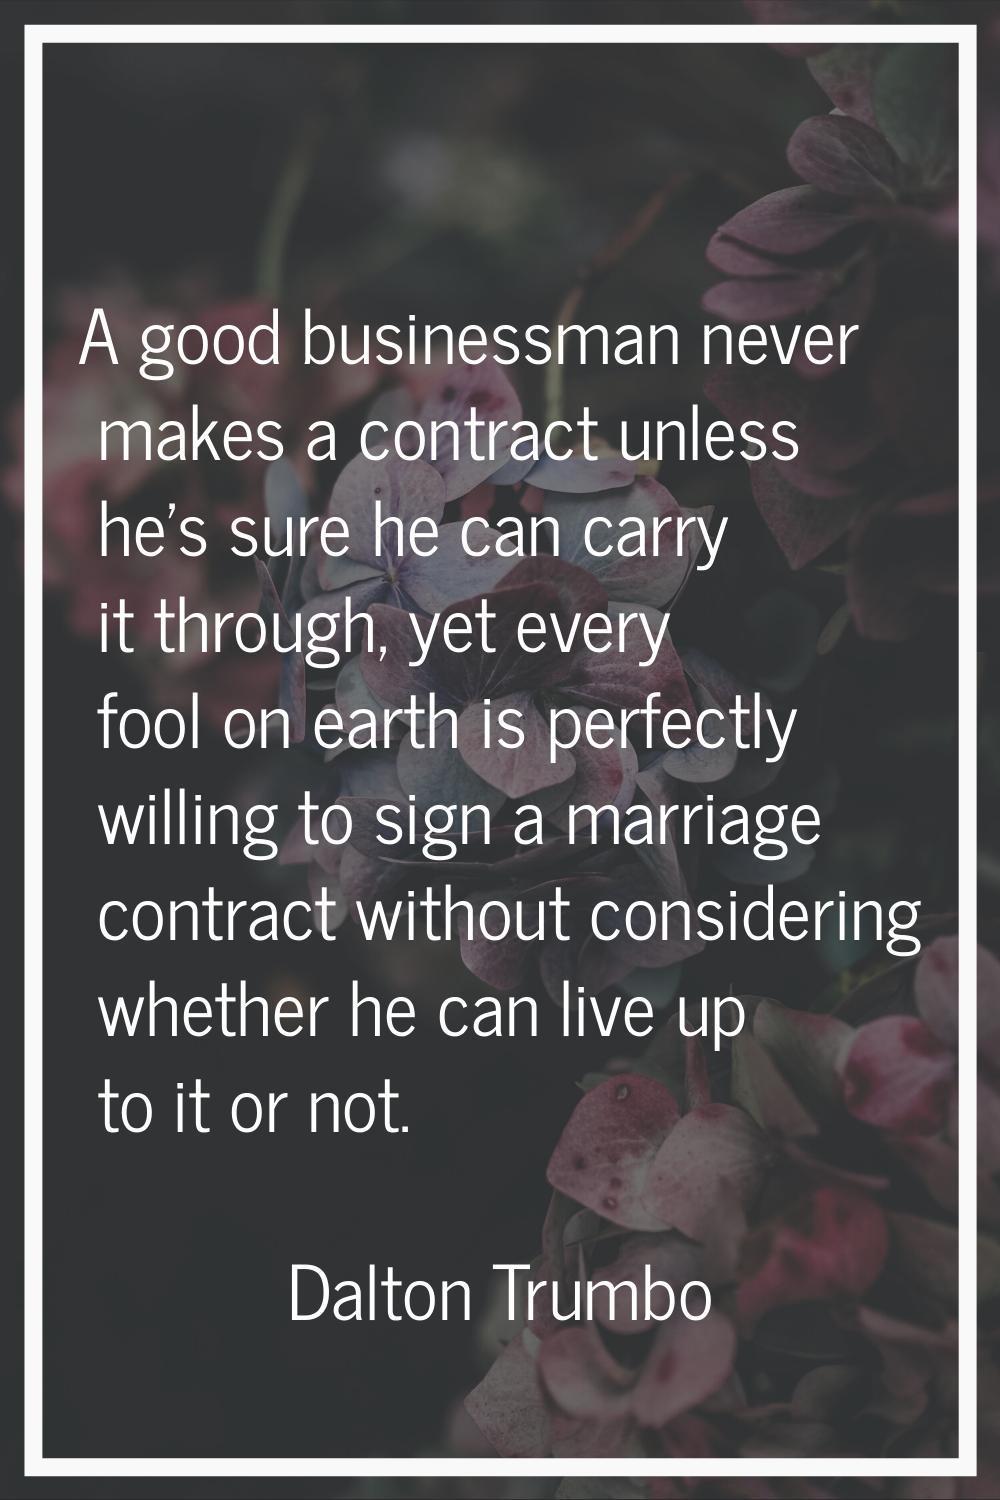 A good businessman never makes a contract unless he's sure he can carry it through, yet every fool 